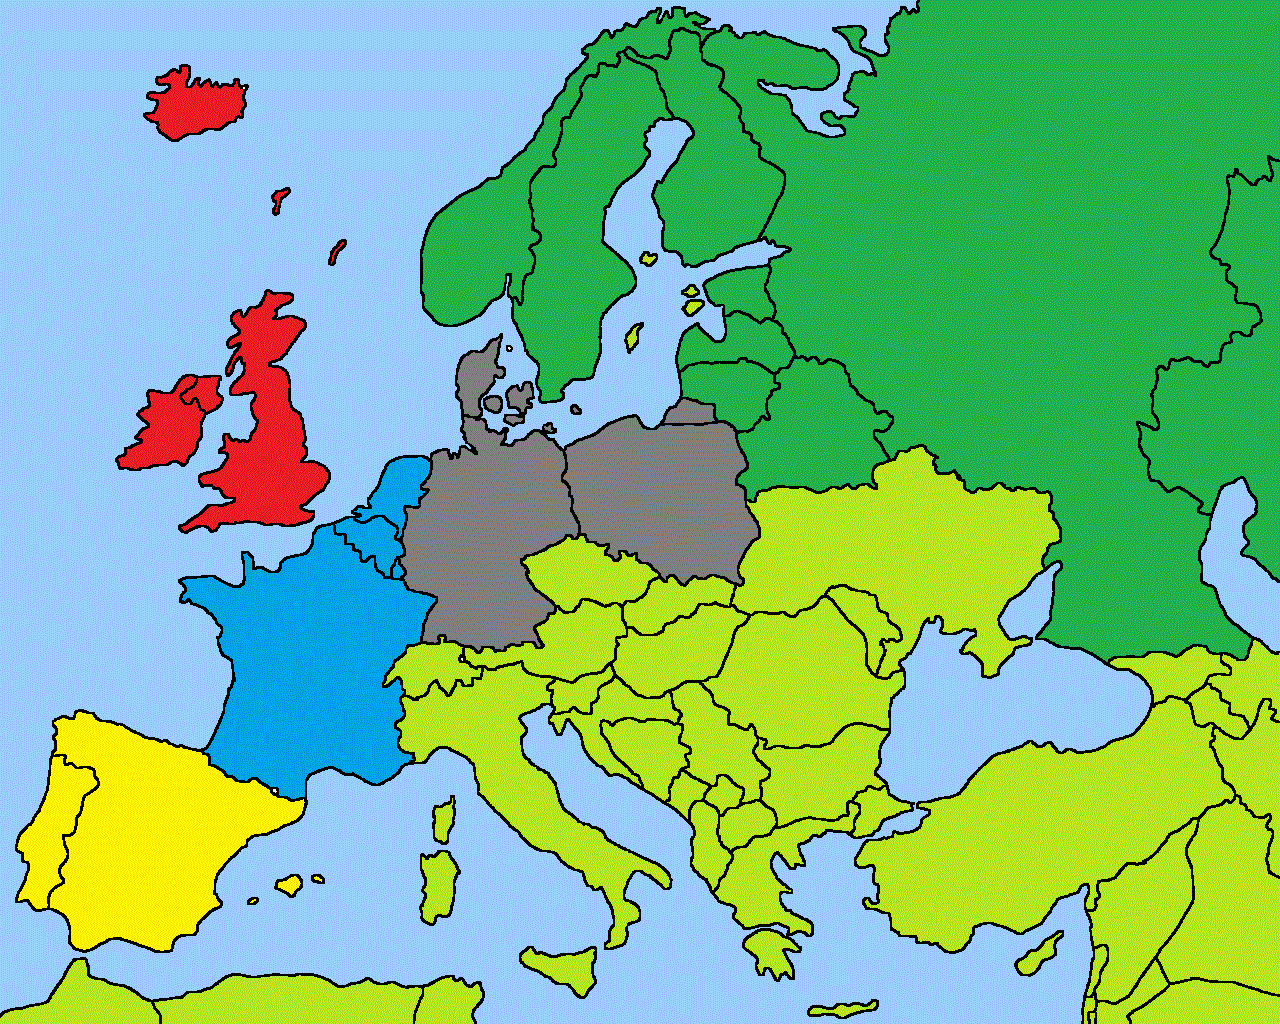 map-of-europe-no-names-a-map-of-europe-countries